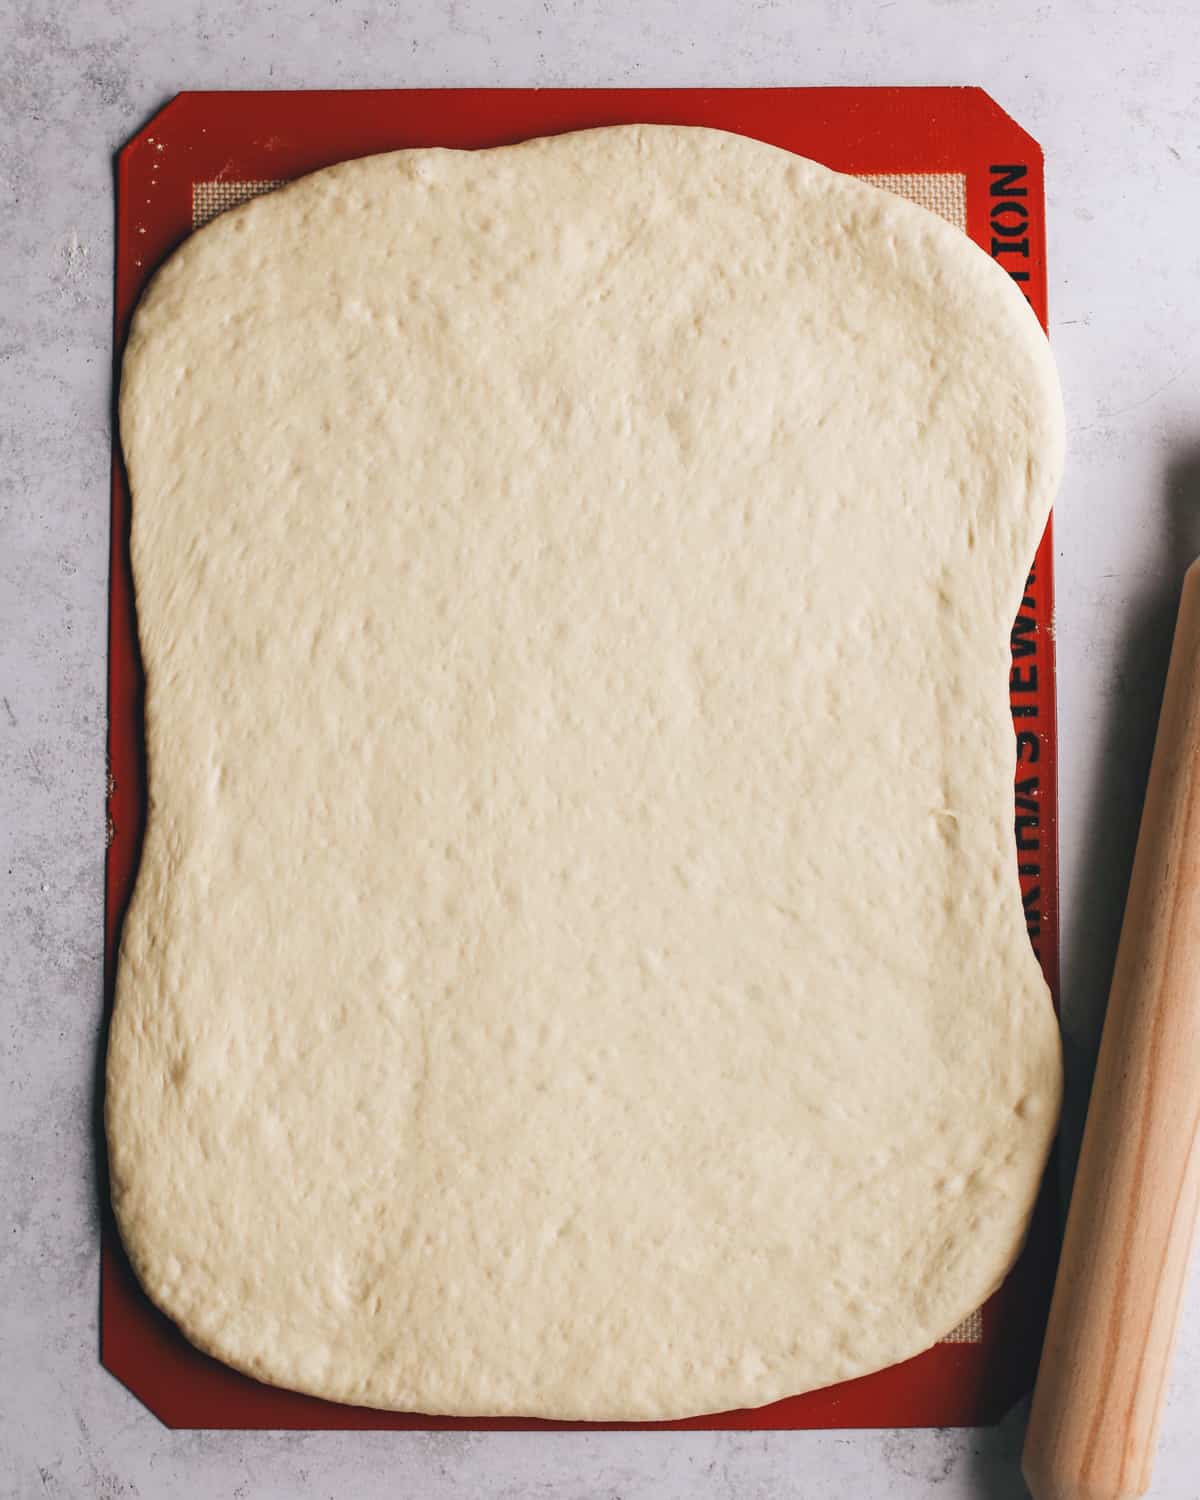 How to Make French Bread - dough formed into a rectangle after rolling